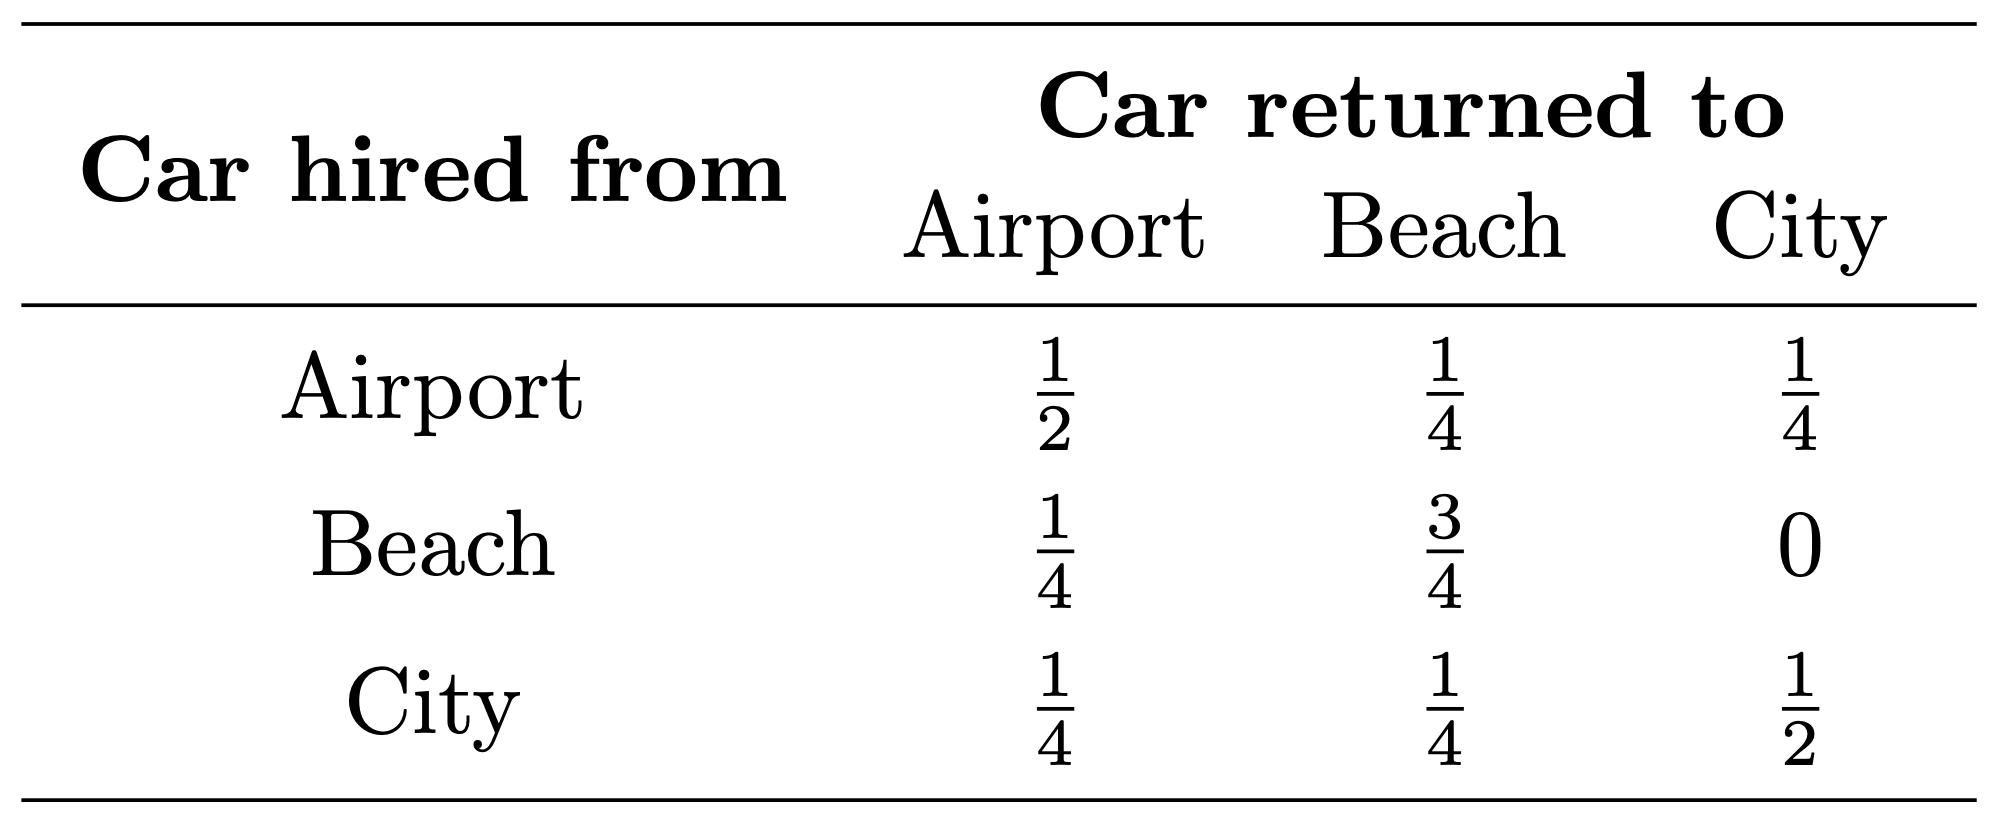 Table of car-hire data.